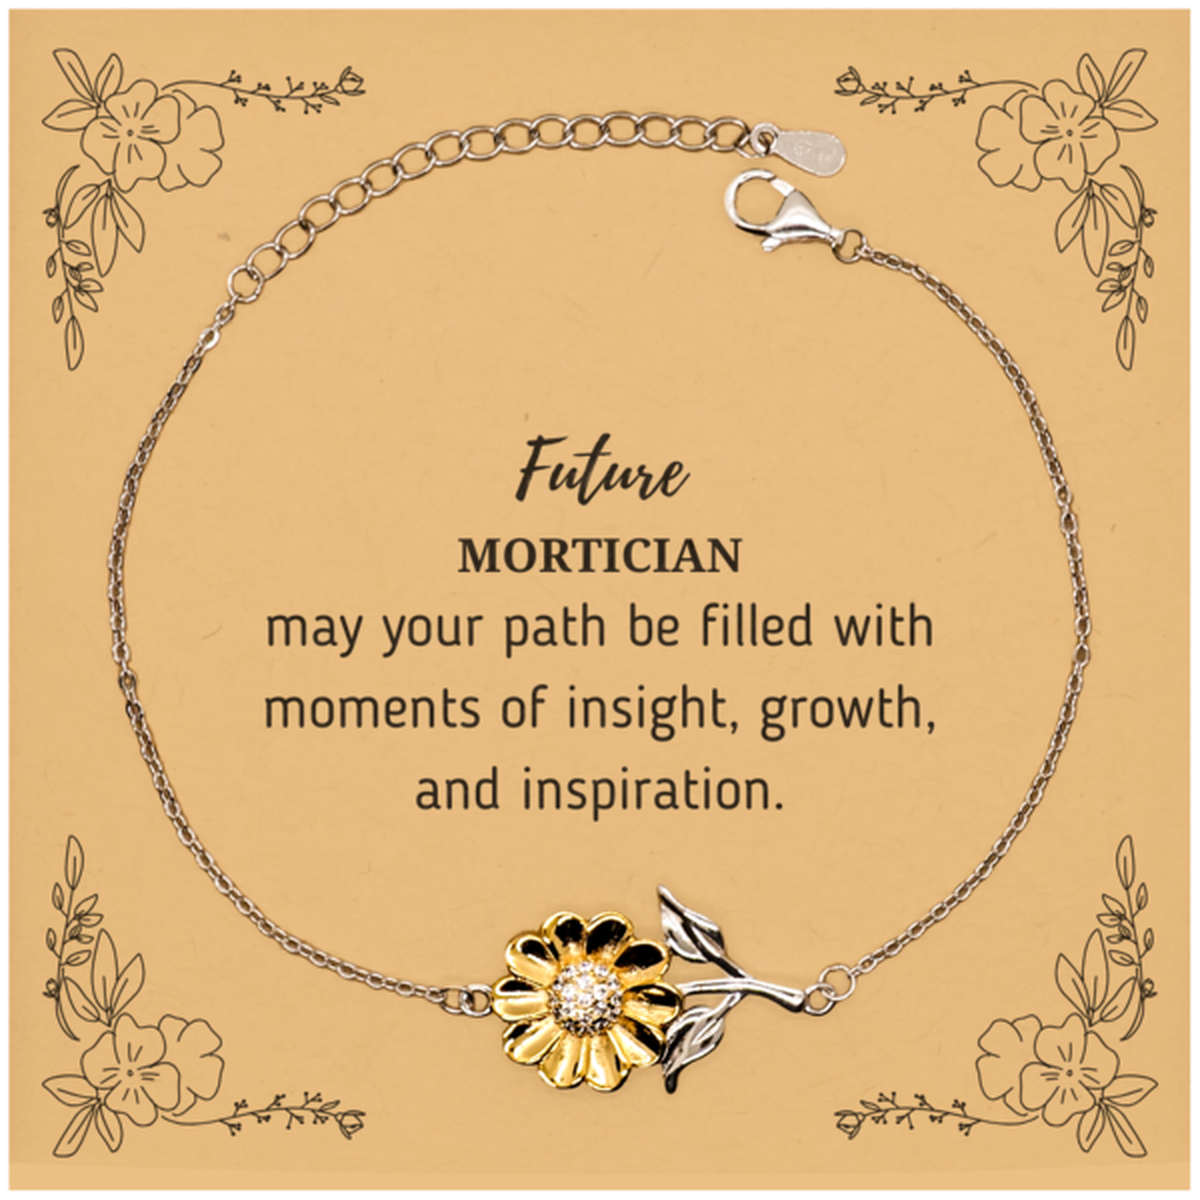 Future Mortician Gifts, May your path be filled with moments of insight, Graduation Gifts for New Mortician, Christmas Unique Sunflower Bracelet For Men, Women, Friends